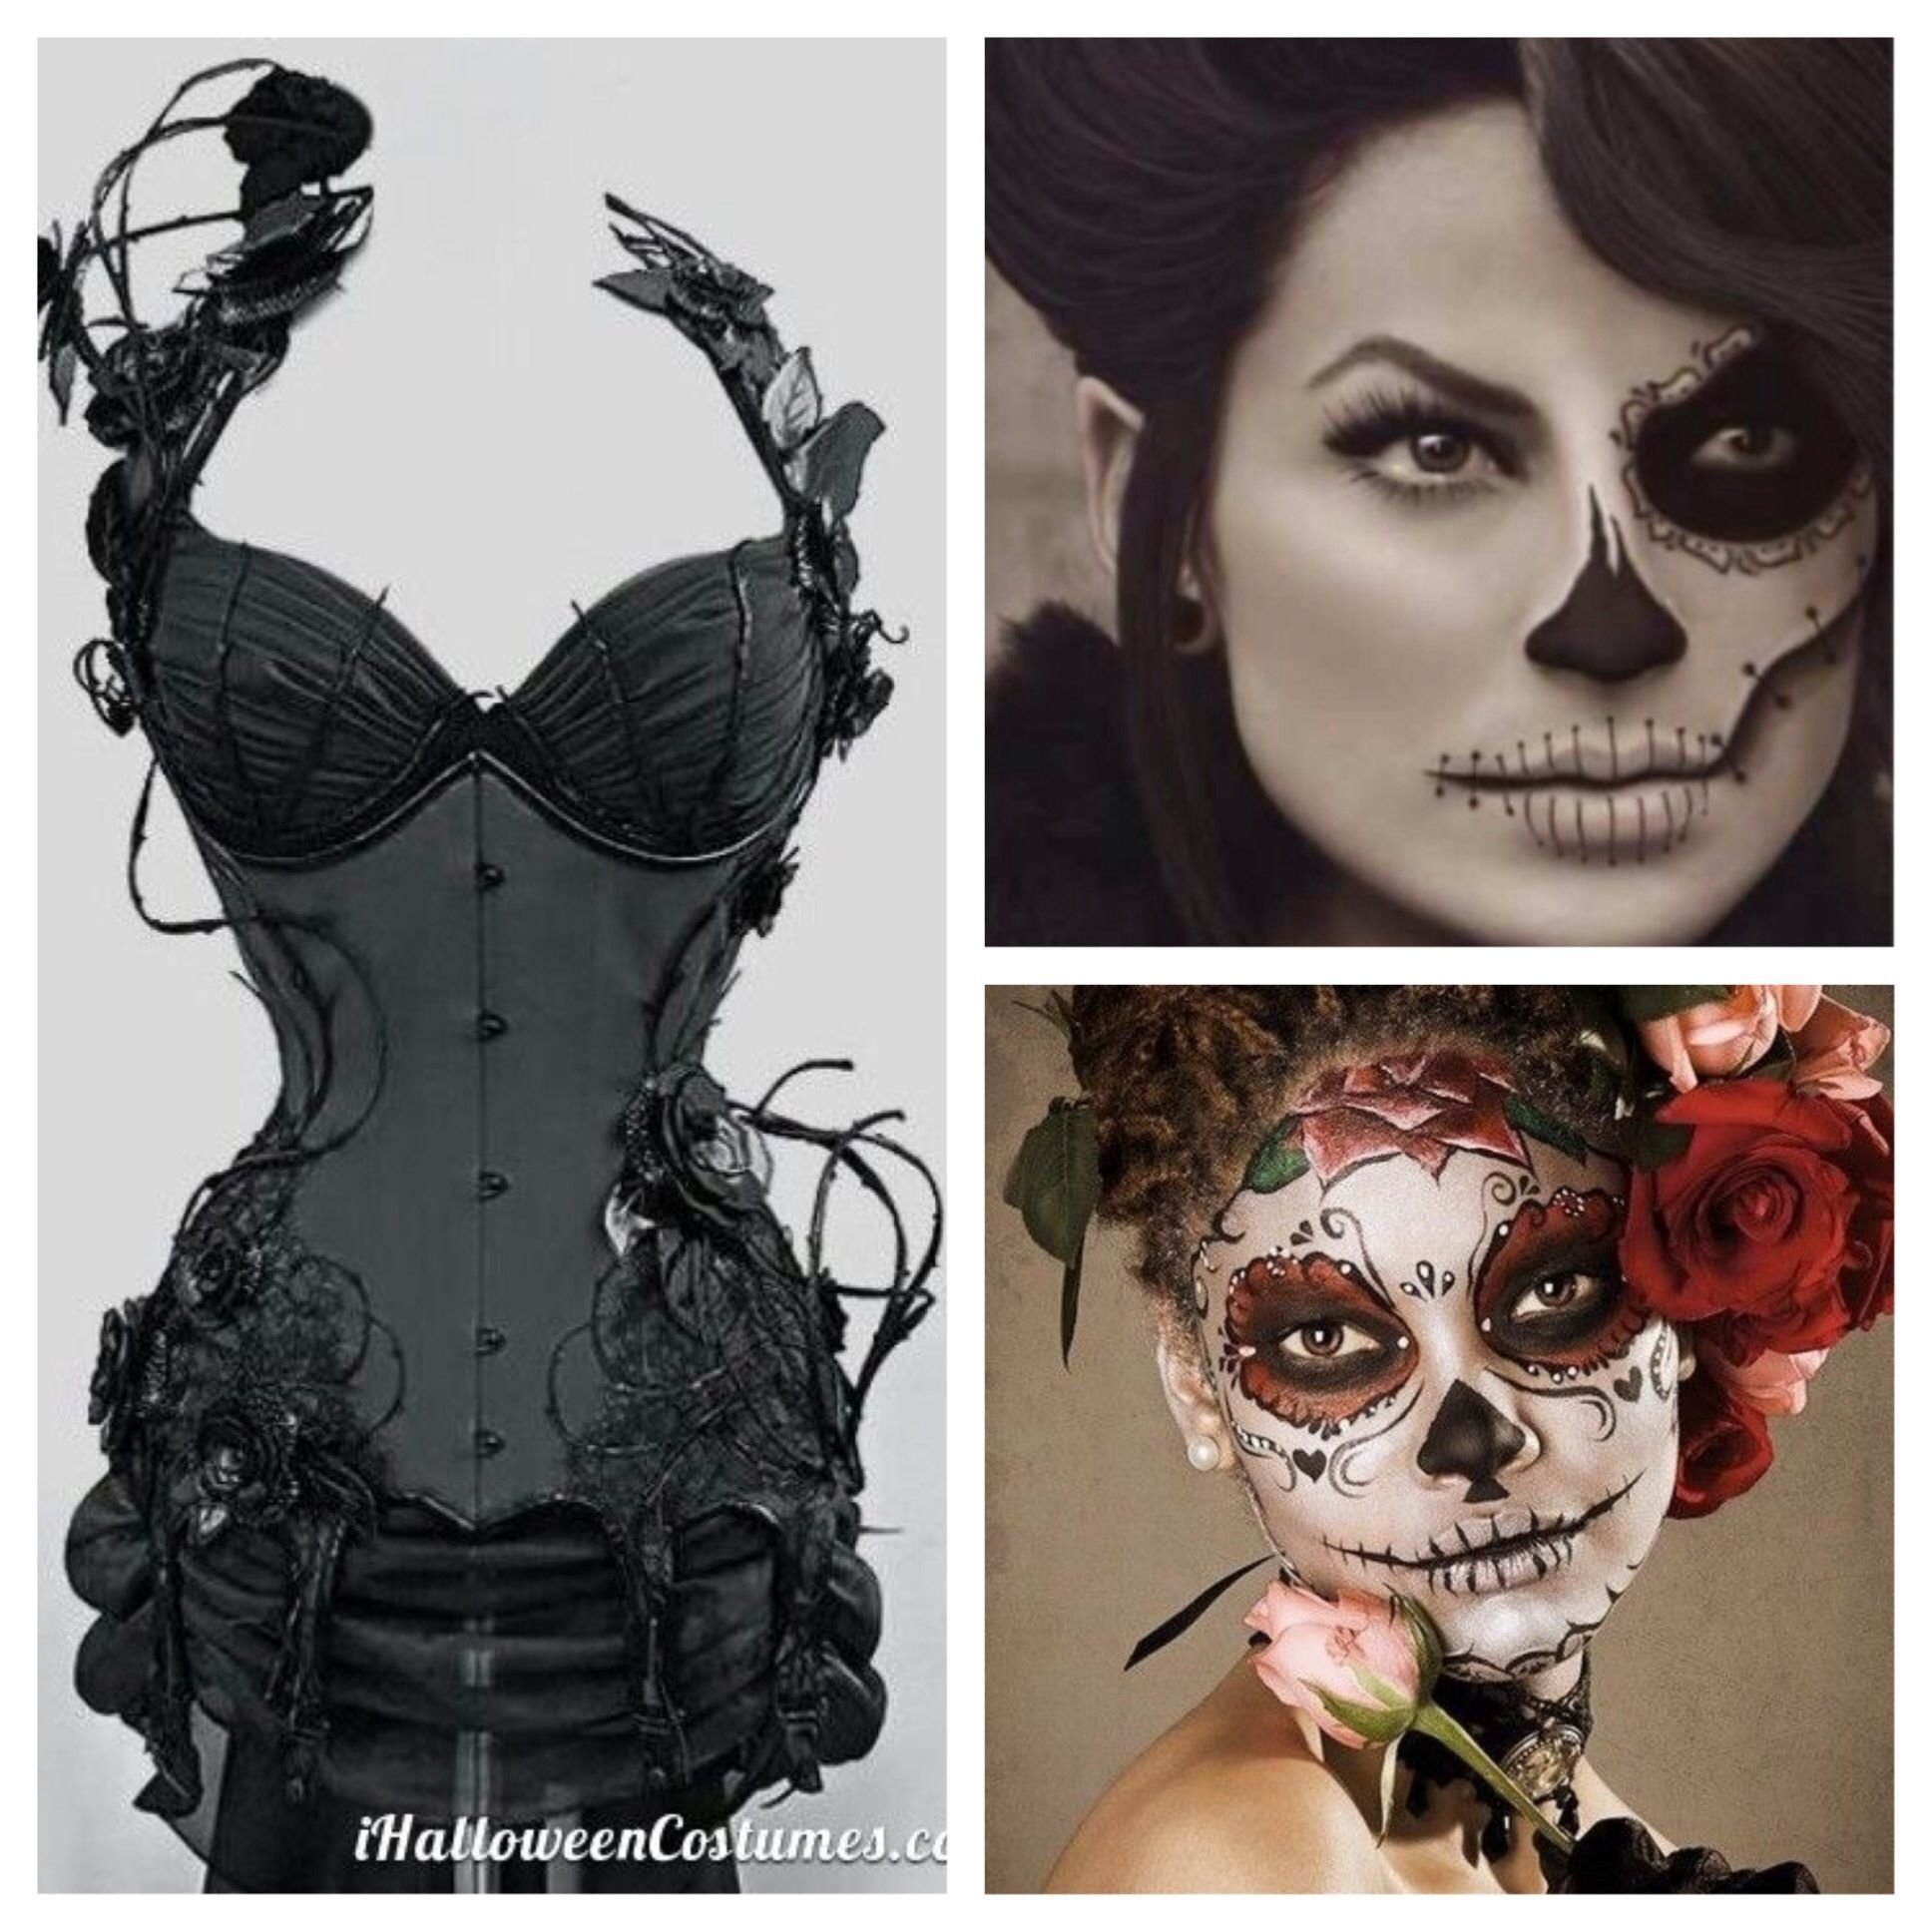 10 Famous Sugar Skull Halloween Costume Ideas the makeup in the bottom corner is beautiful hair makeup 2022